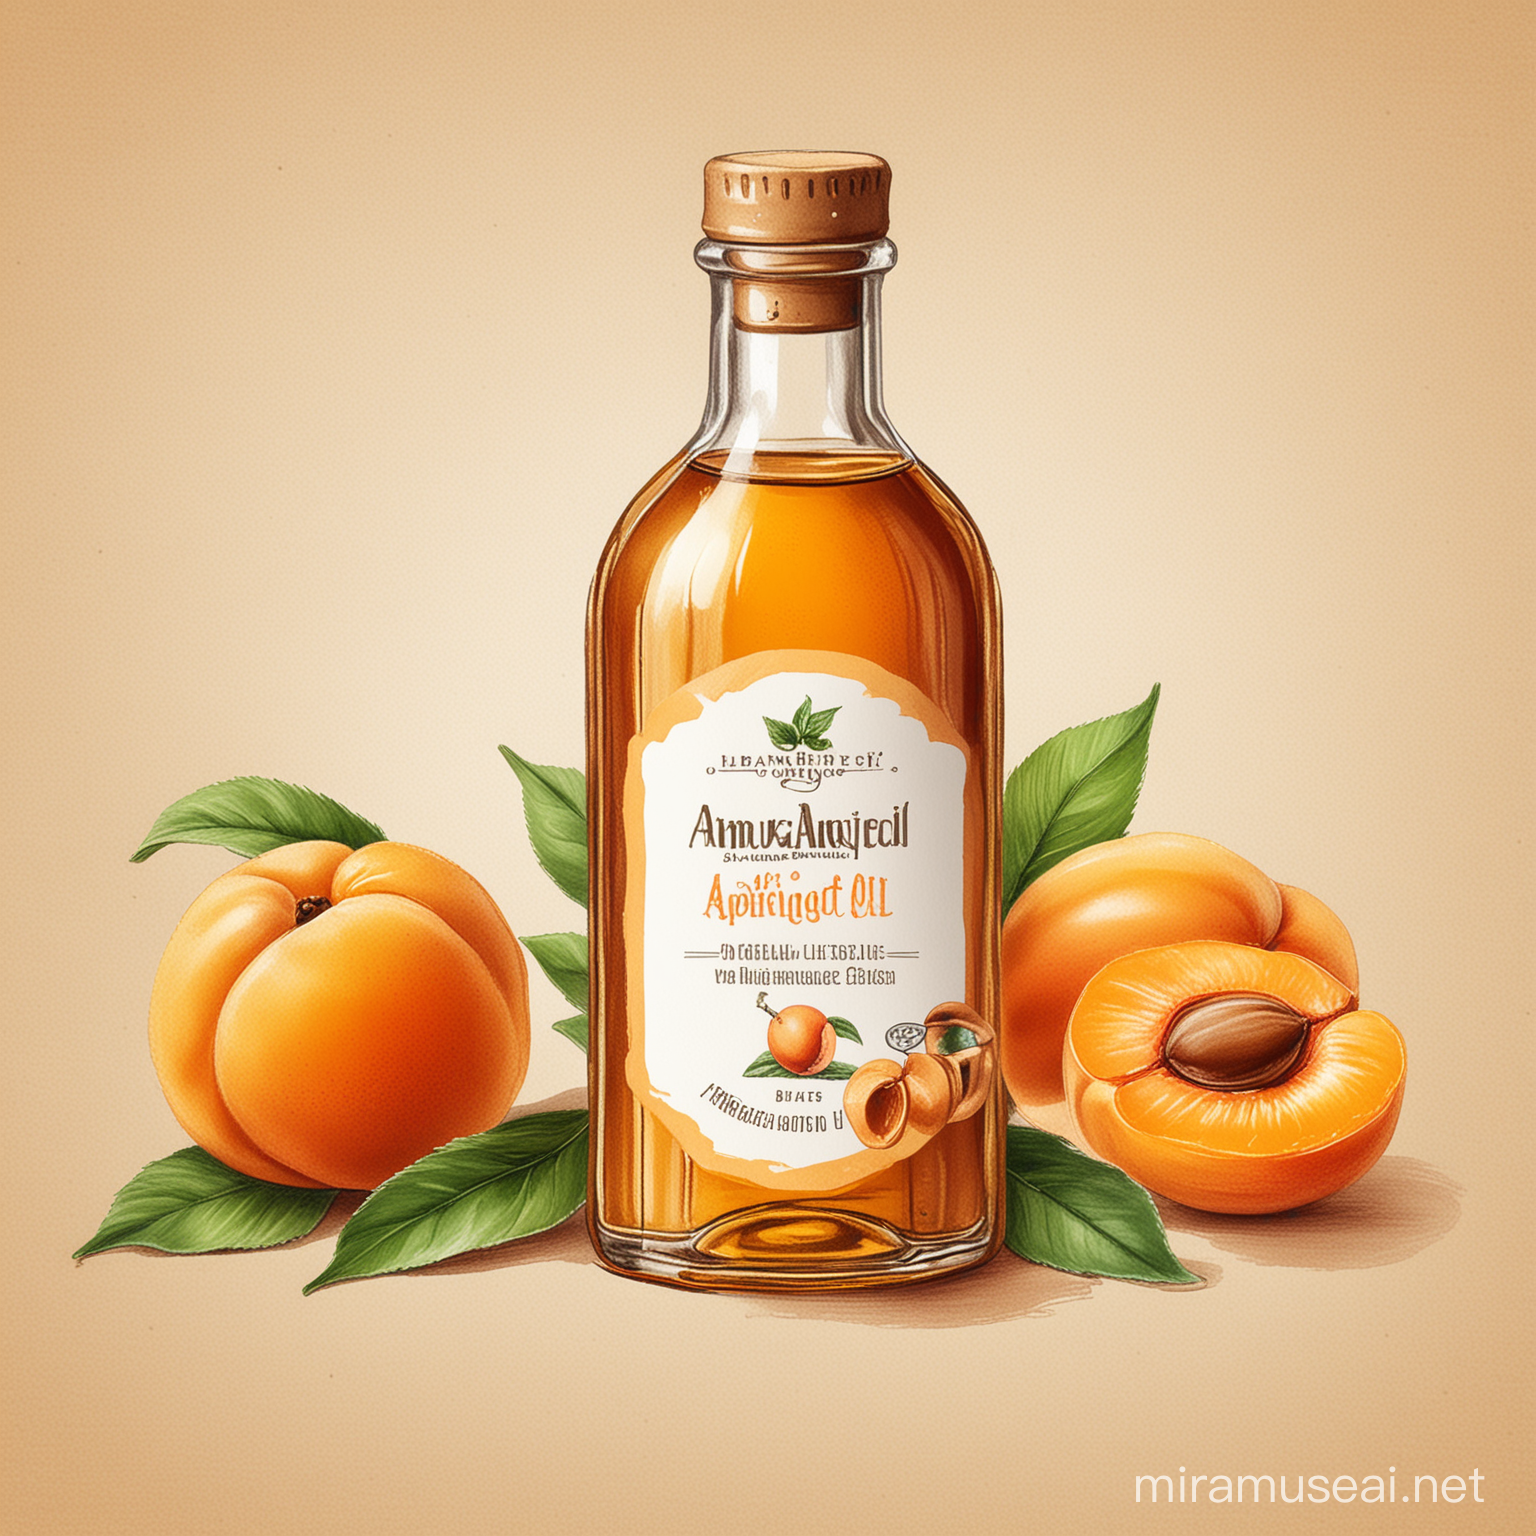 Draw an illustration label sketch for the natural apricot oil, bottle product label.